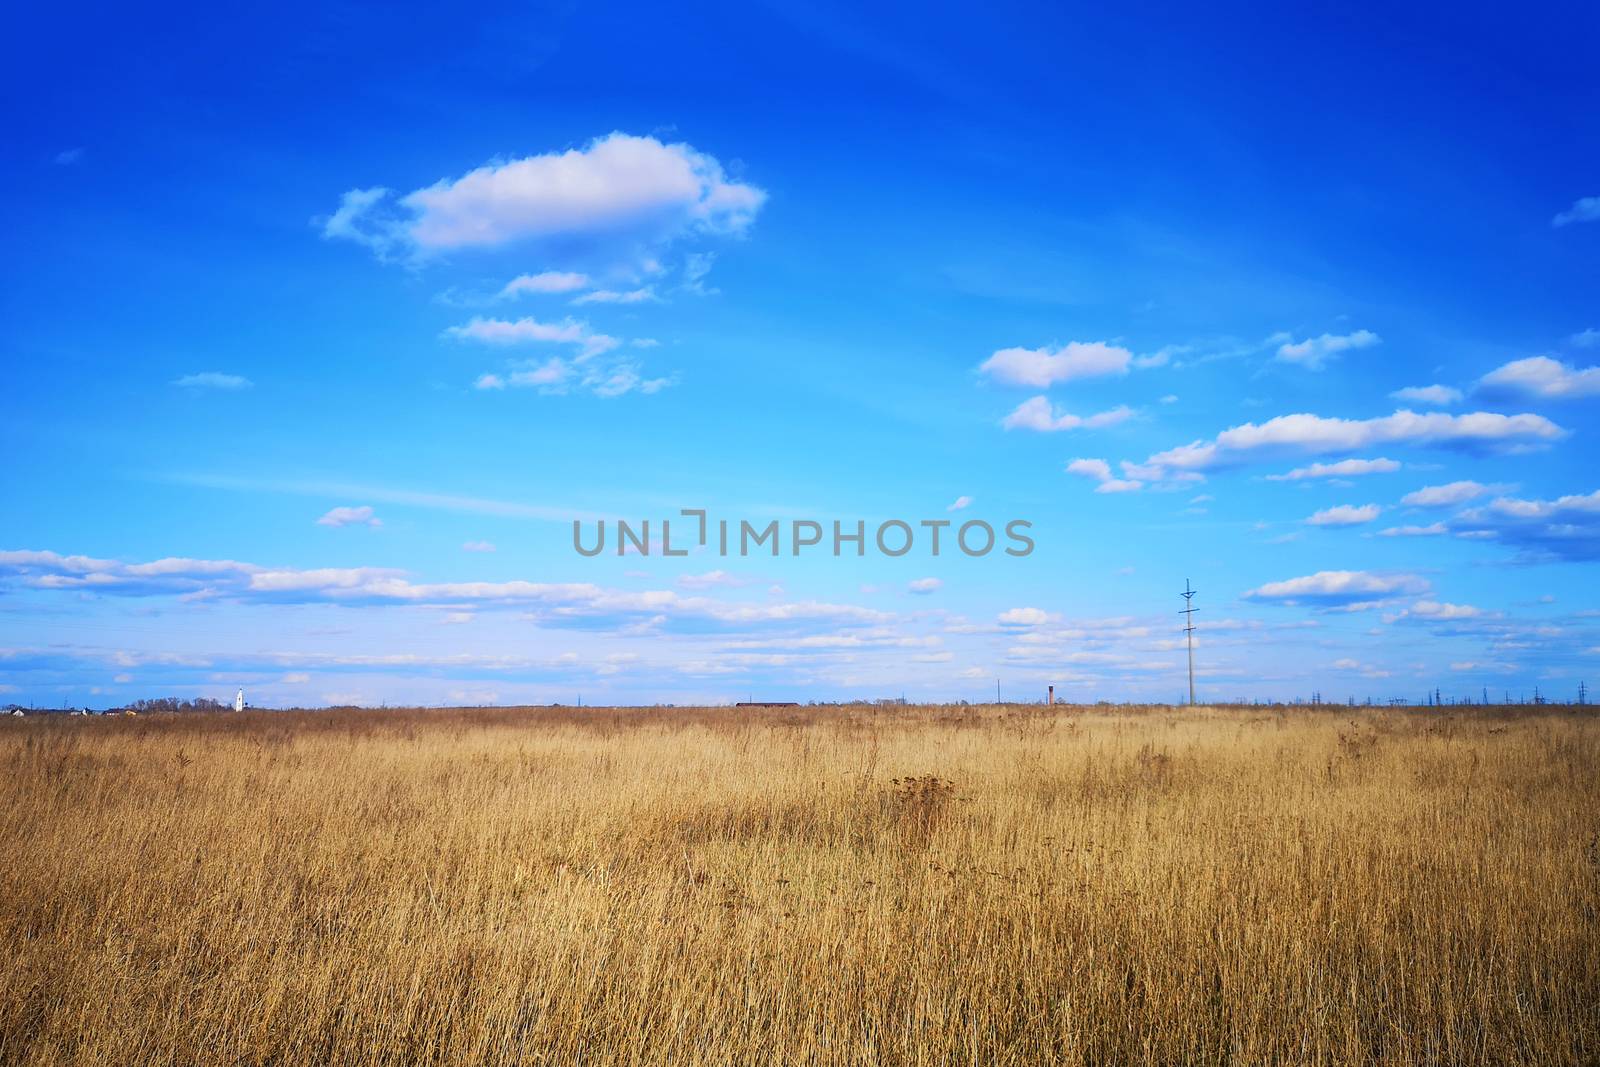 Large white clouds in the blue sky above a village in Russia by galinasharapova